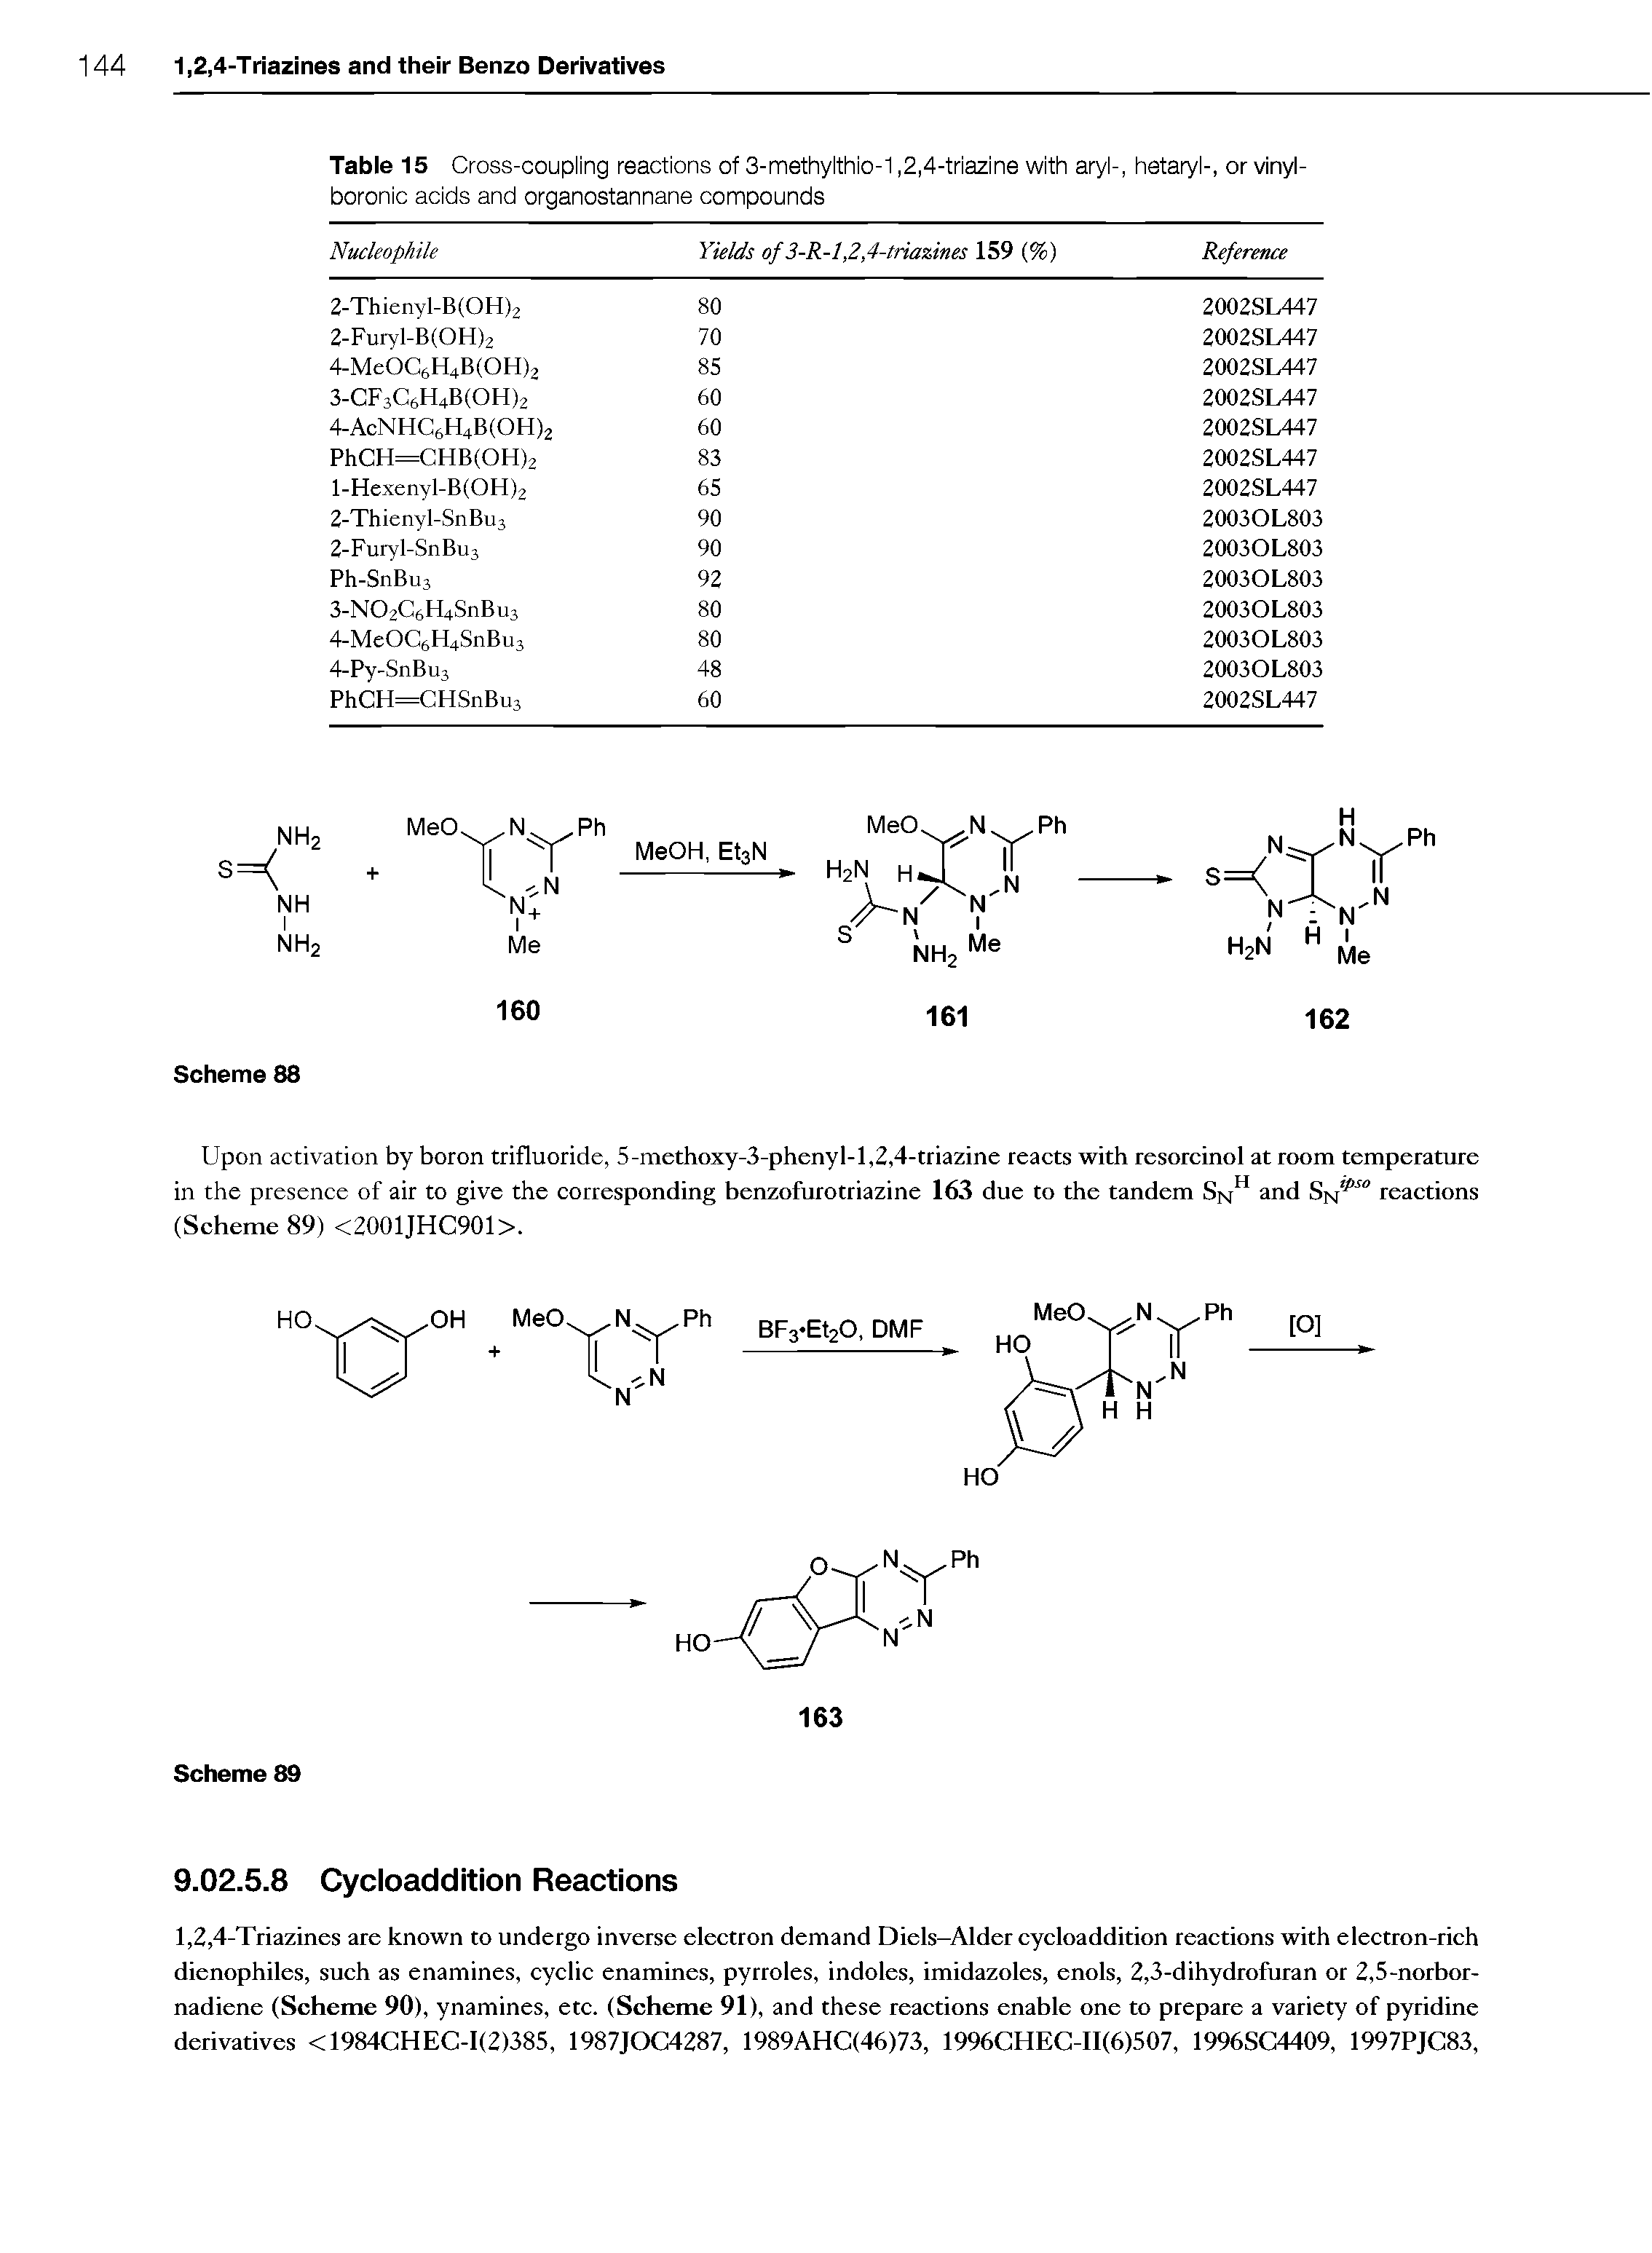 Table 15 Cross-coupling reactions of 3-methylthio-1,2,4-triazine with aryl-, hetaryl-, or vinyl-boronio aoids and organostannane oompounds...